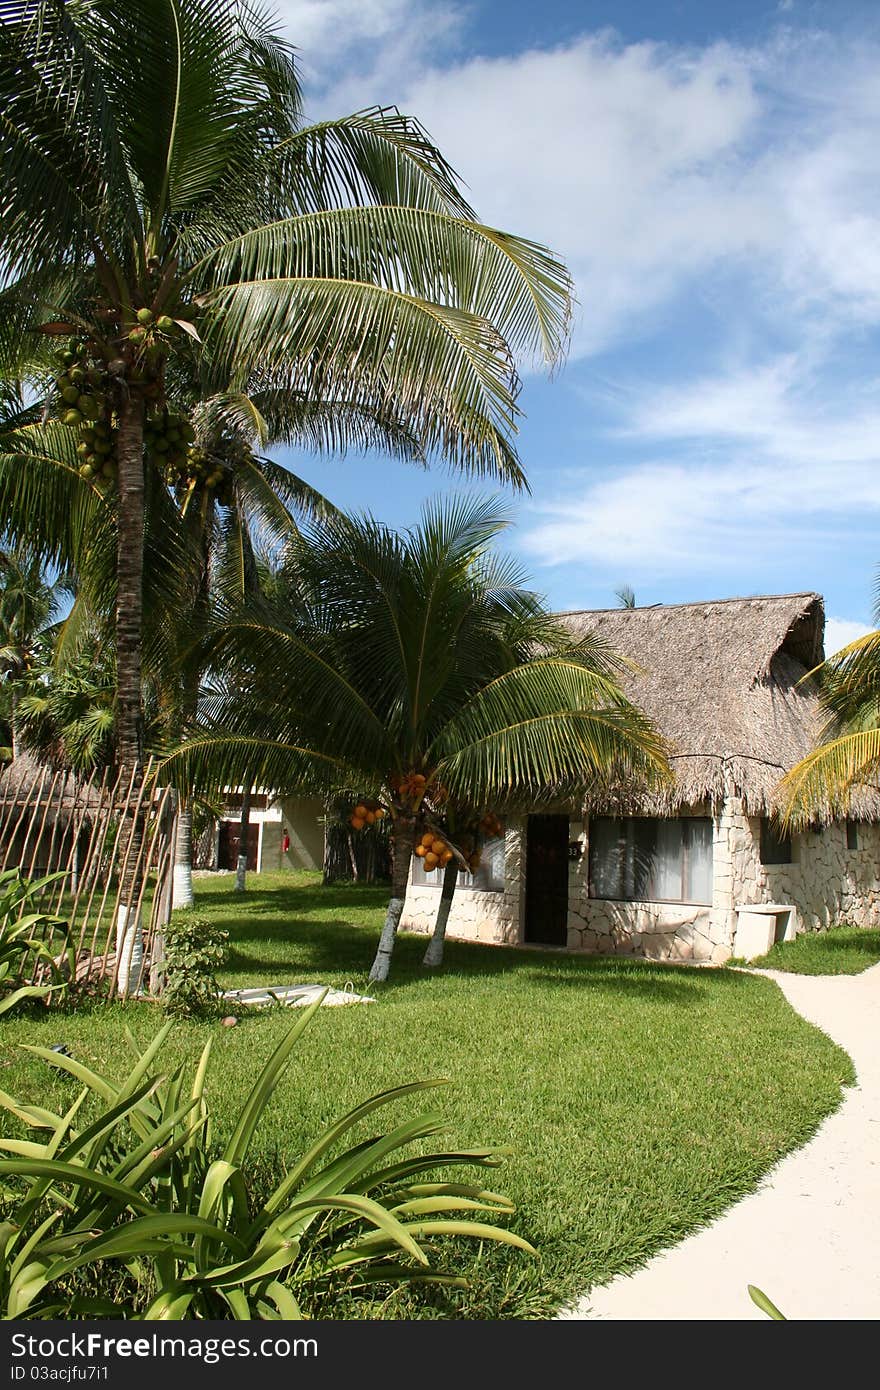 Holiday Resort  in Tulum - Mexico, South of Cancun. Holiday Resort  in Tulum - Mexico, South of Cancun